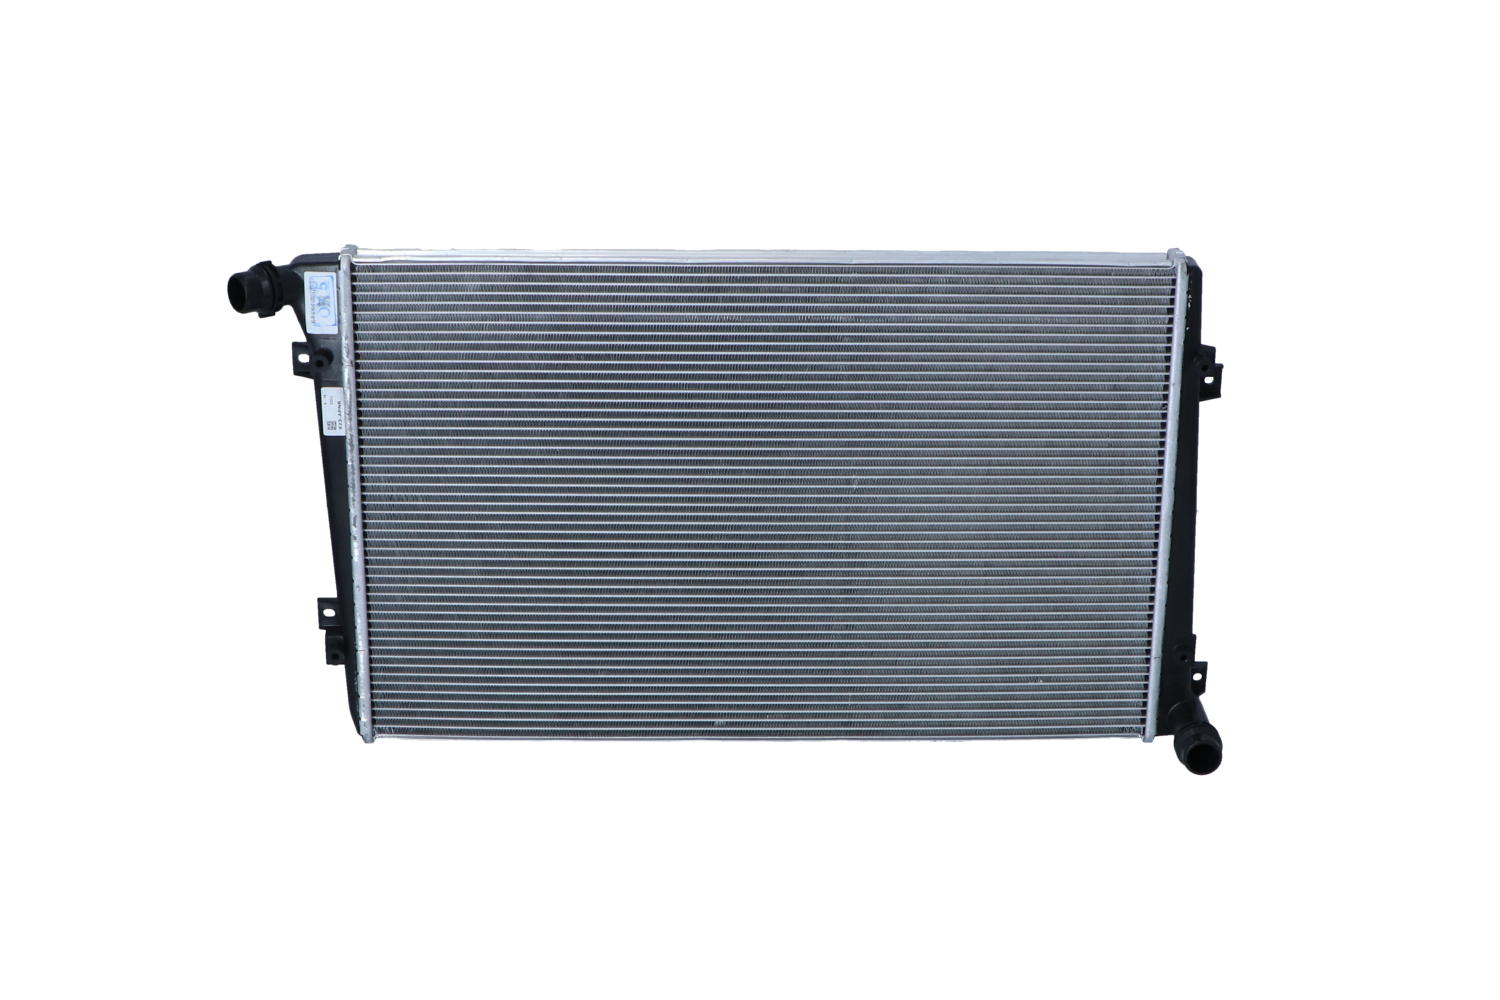 NRF EASY FIT 53813 Engine radiator Aluminium, 648 x 408 x 32 mm, with seal ring, Brazed cooling fins